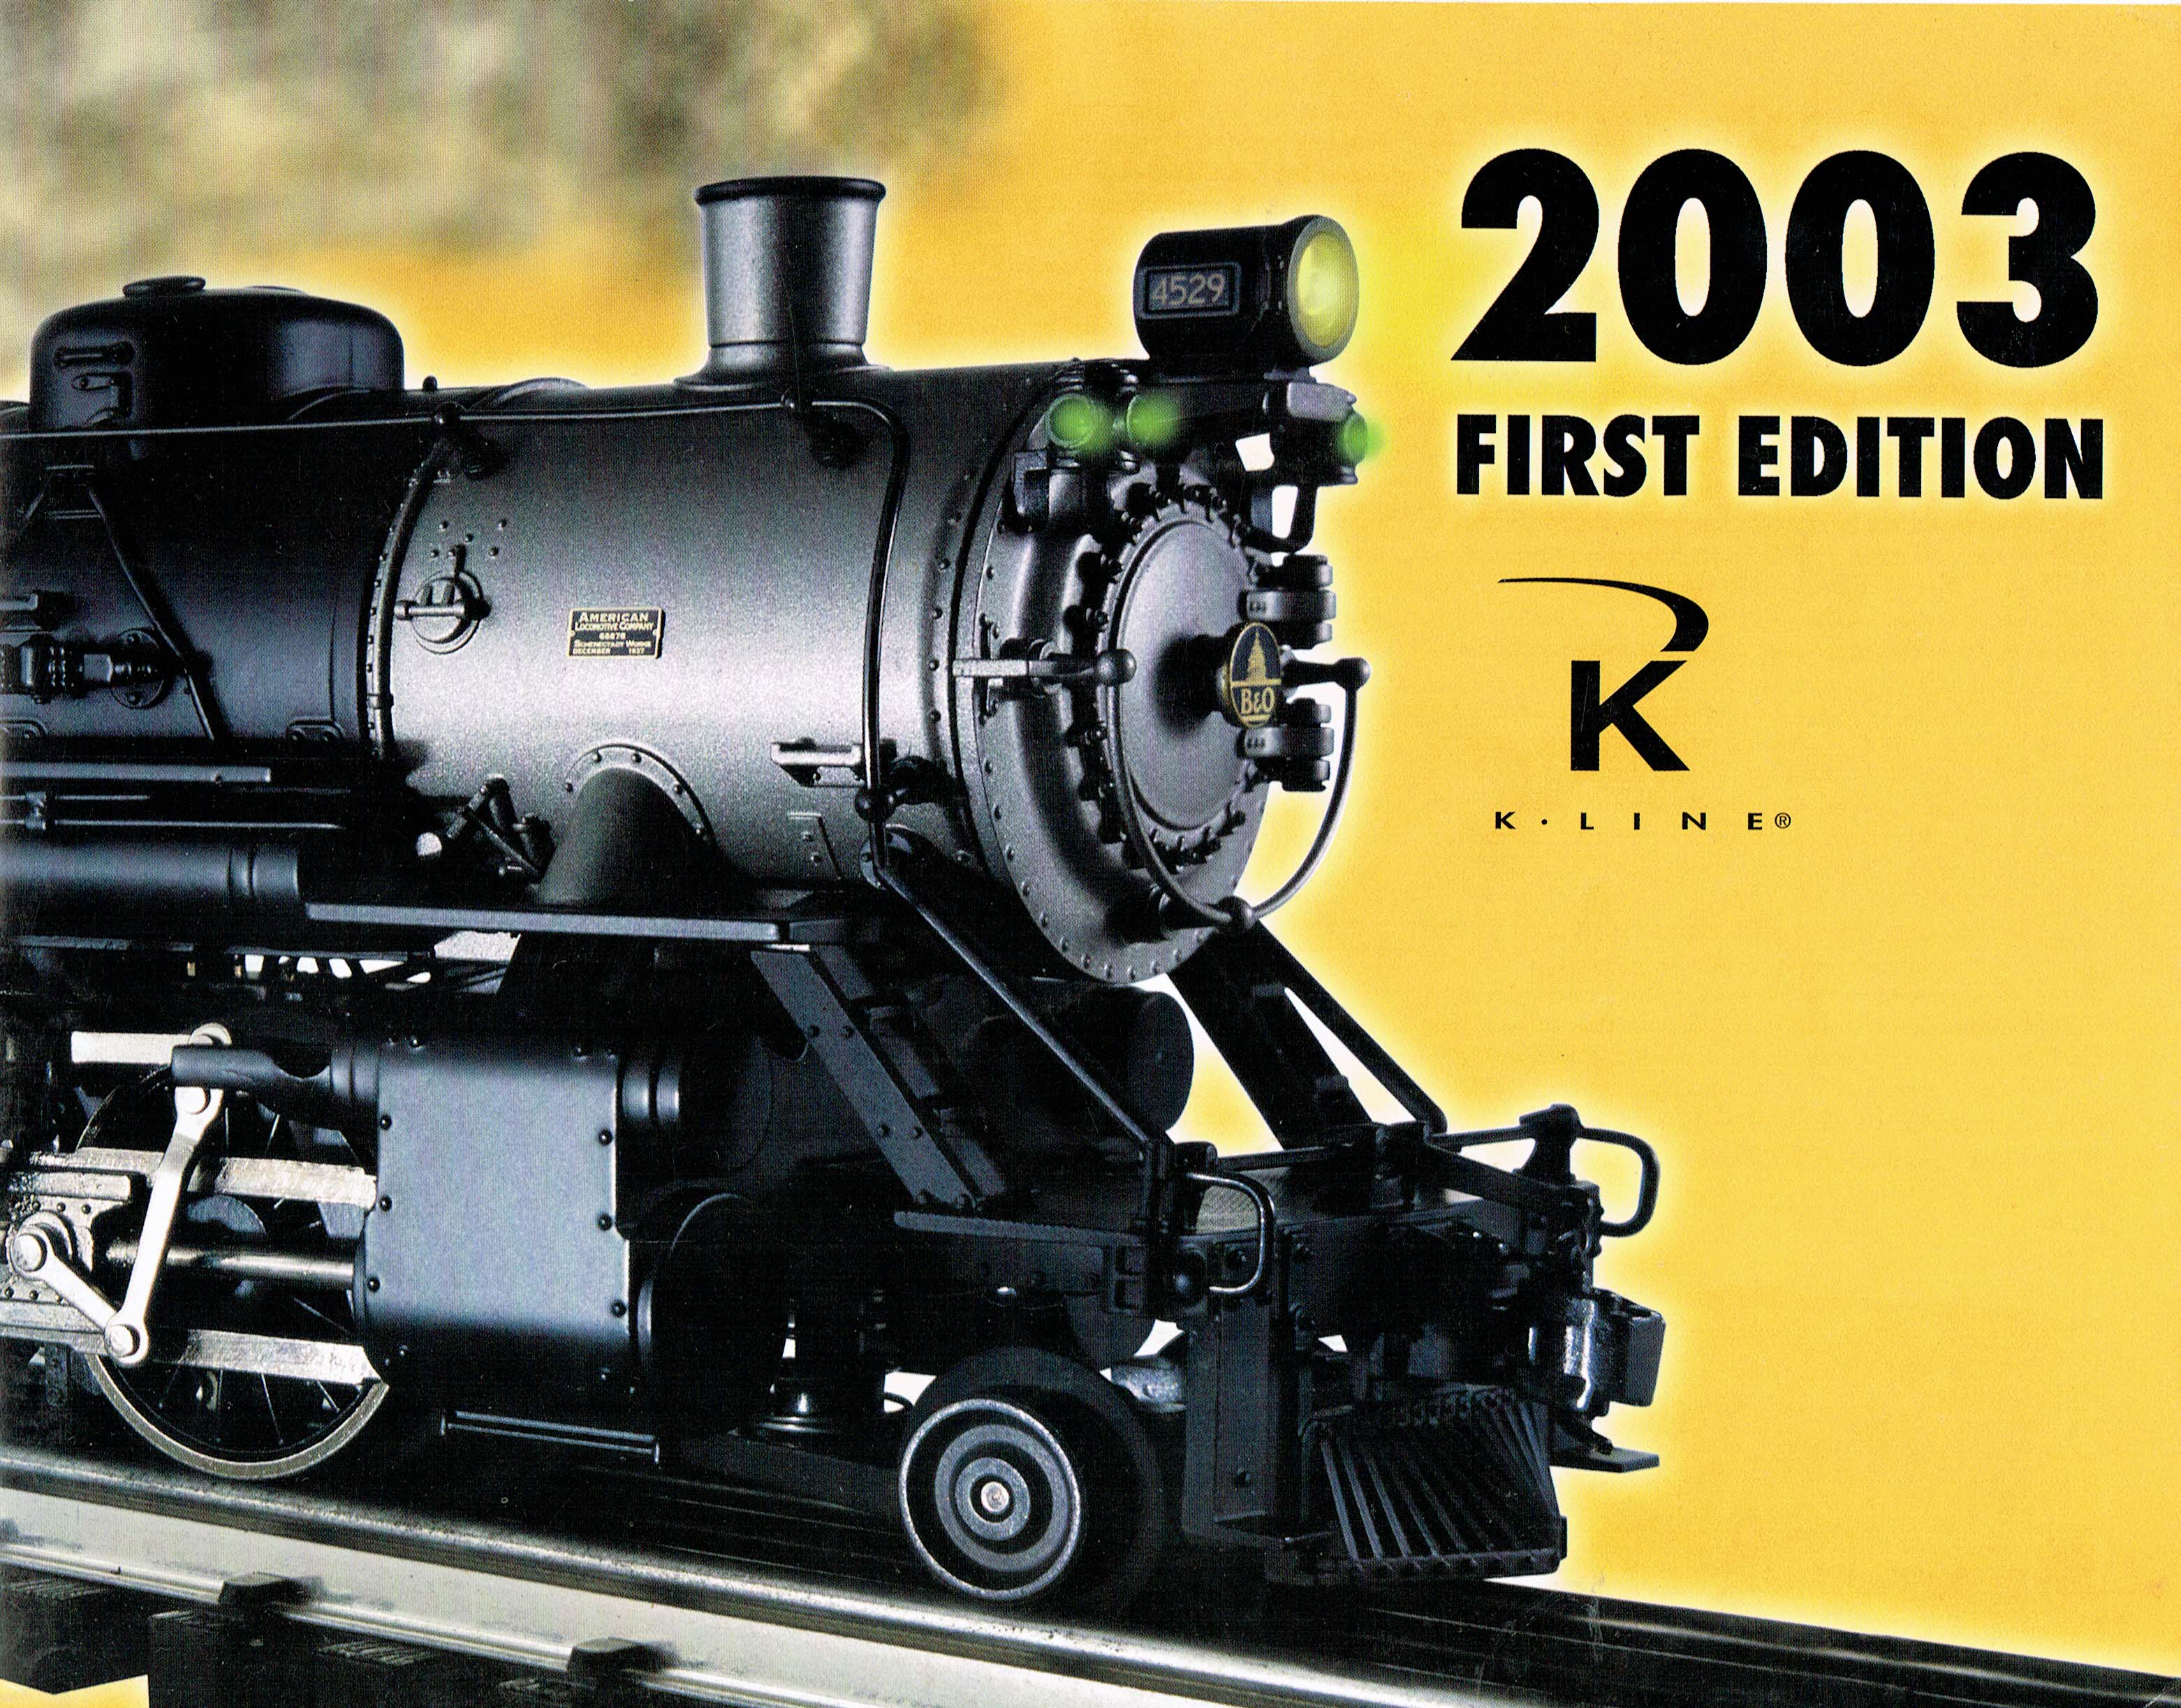 K-Line 2003 First Edition Catalog image